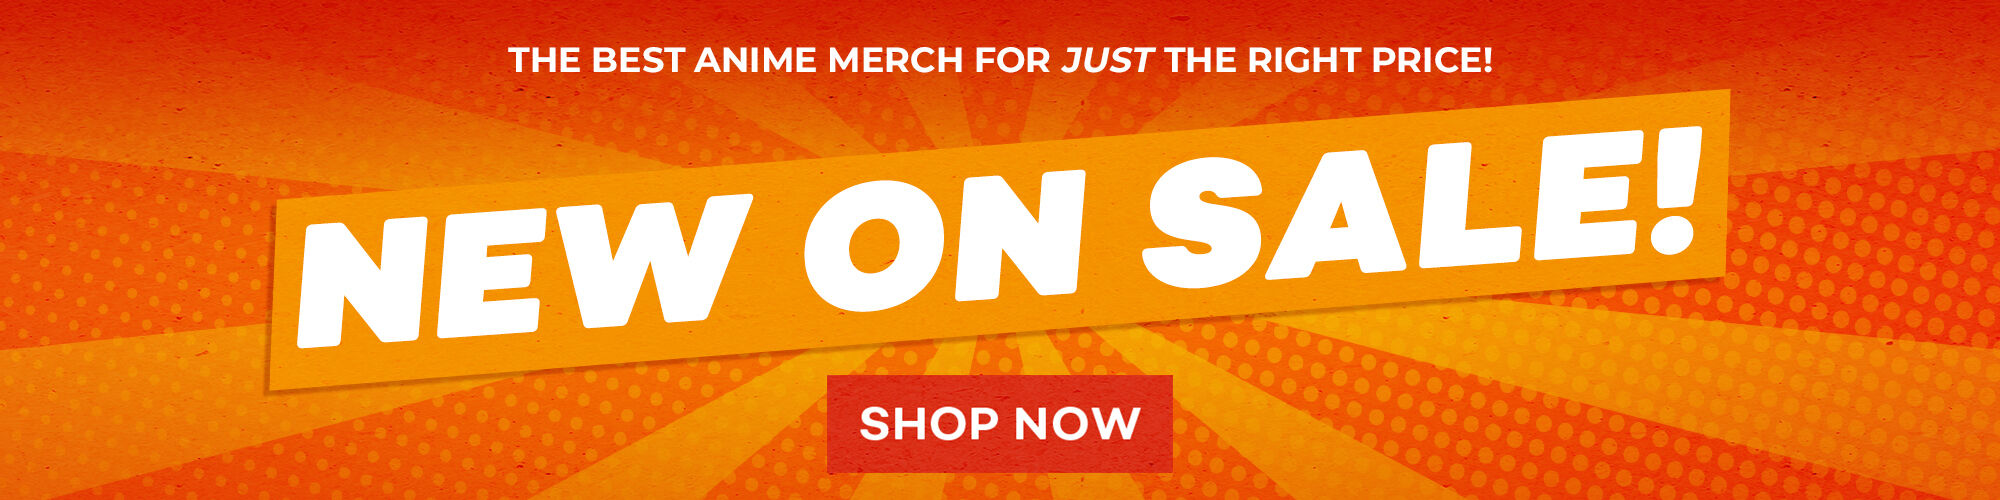  Crunchyroll Weekly Specials. The Best Anime Merch for the Right Price.